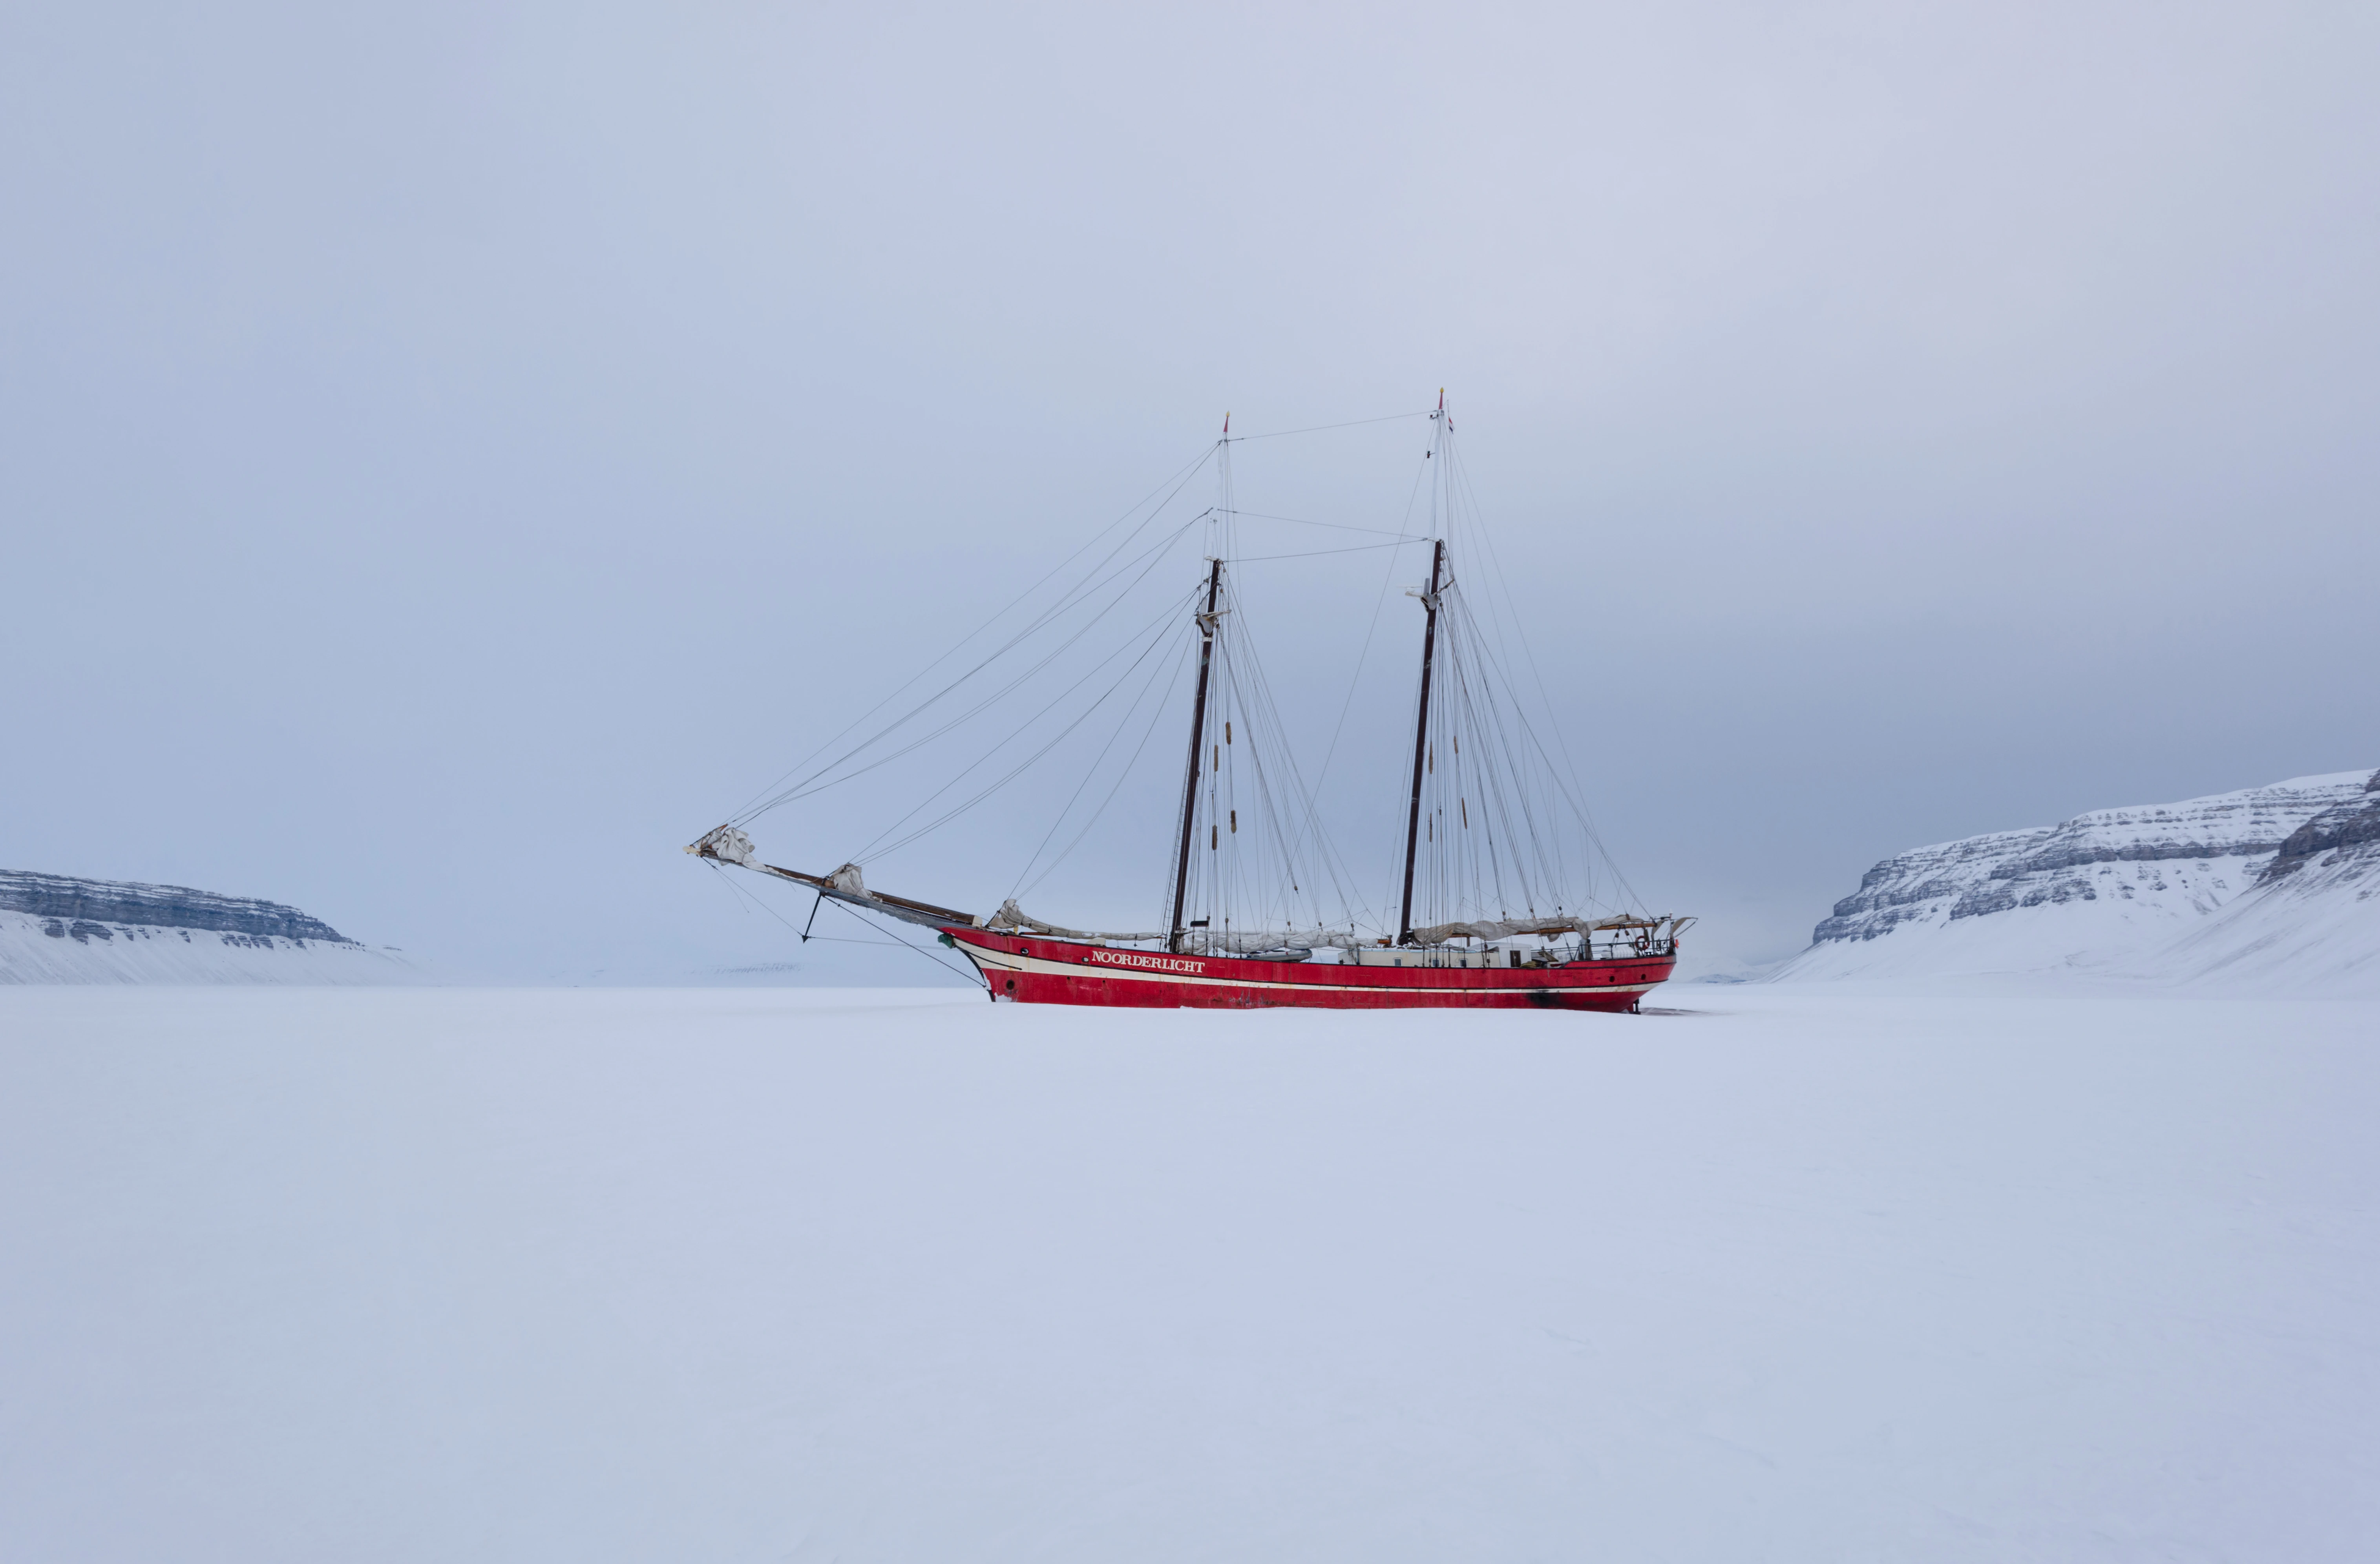 Red ship sailing in icy waters.